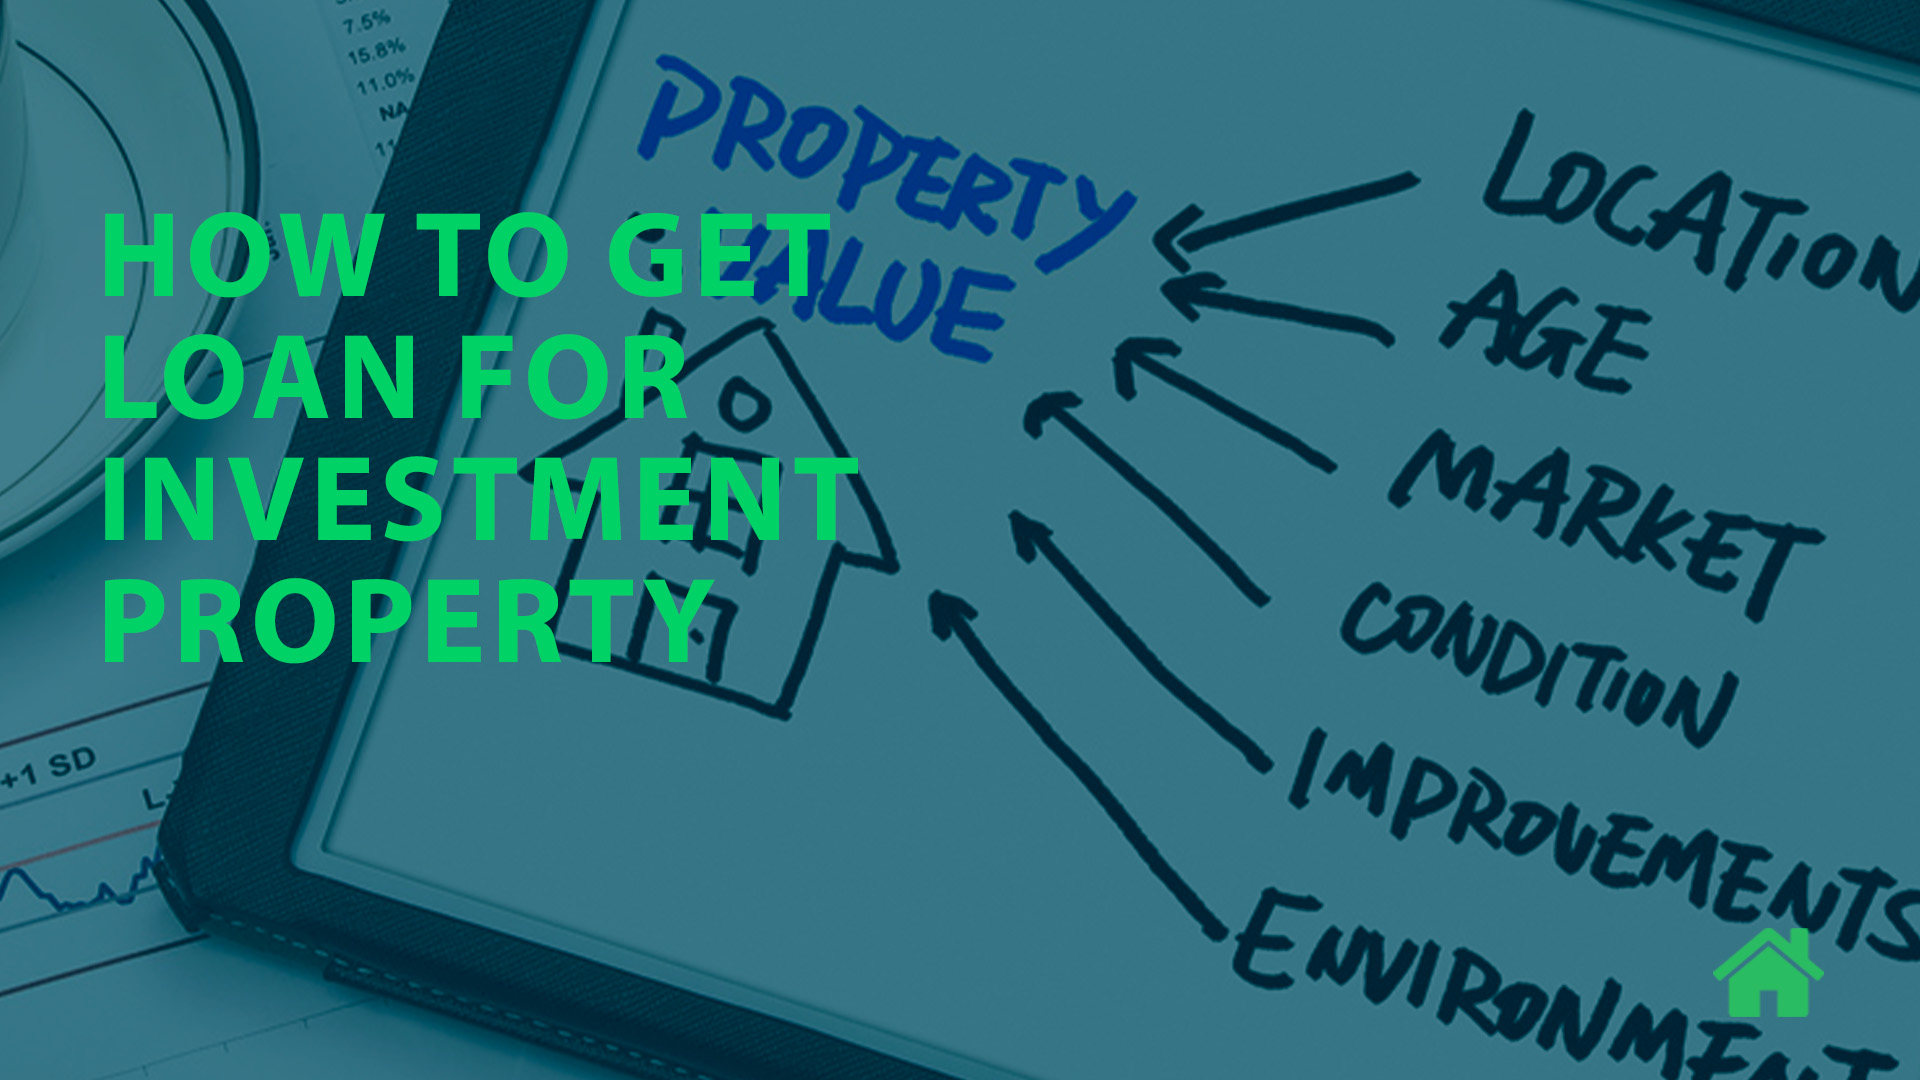 How to get loan for investment property